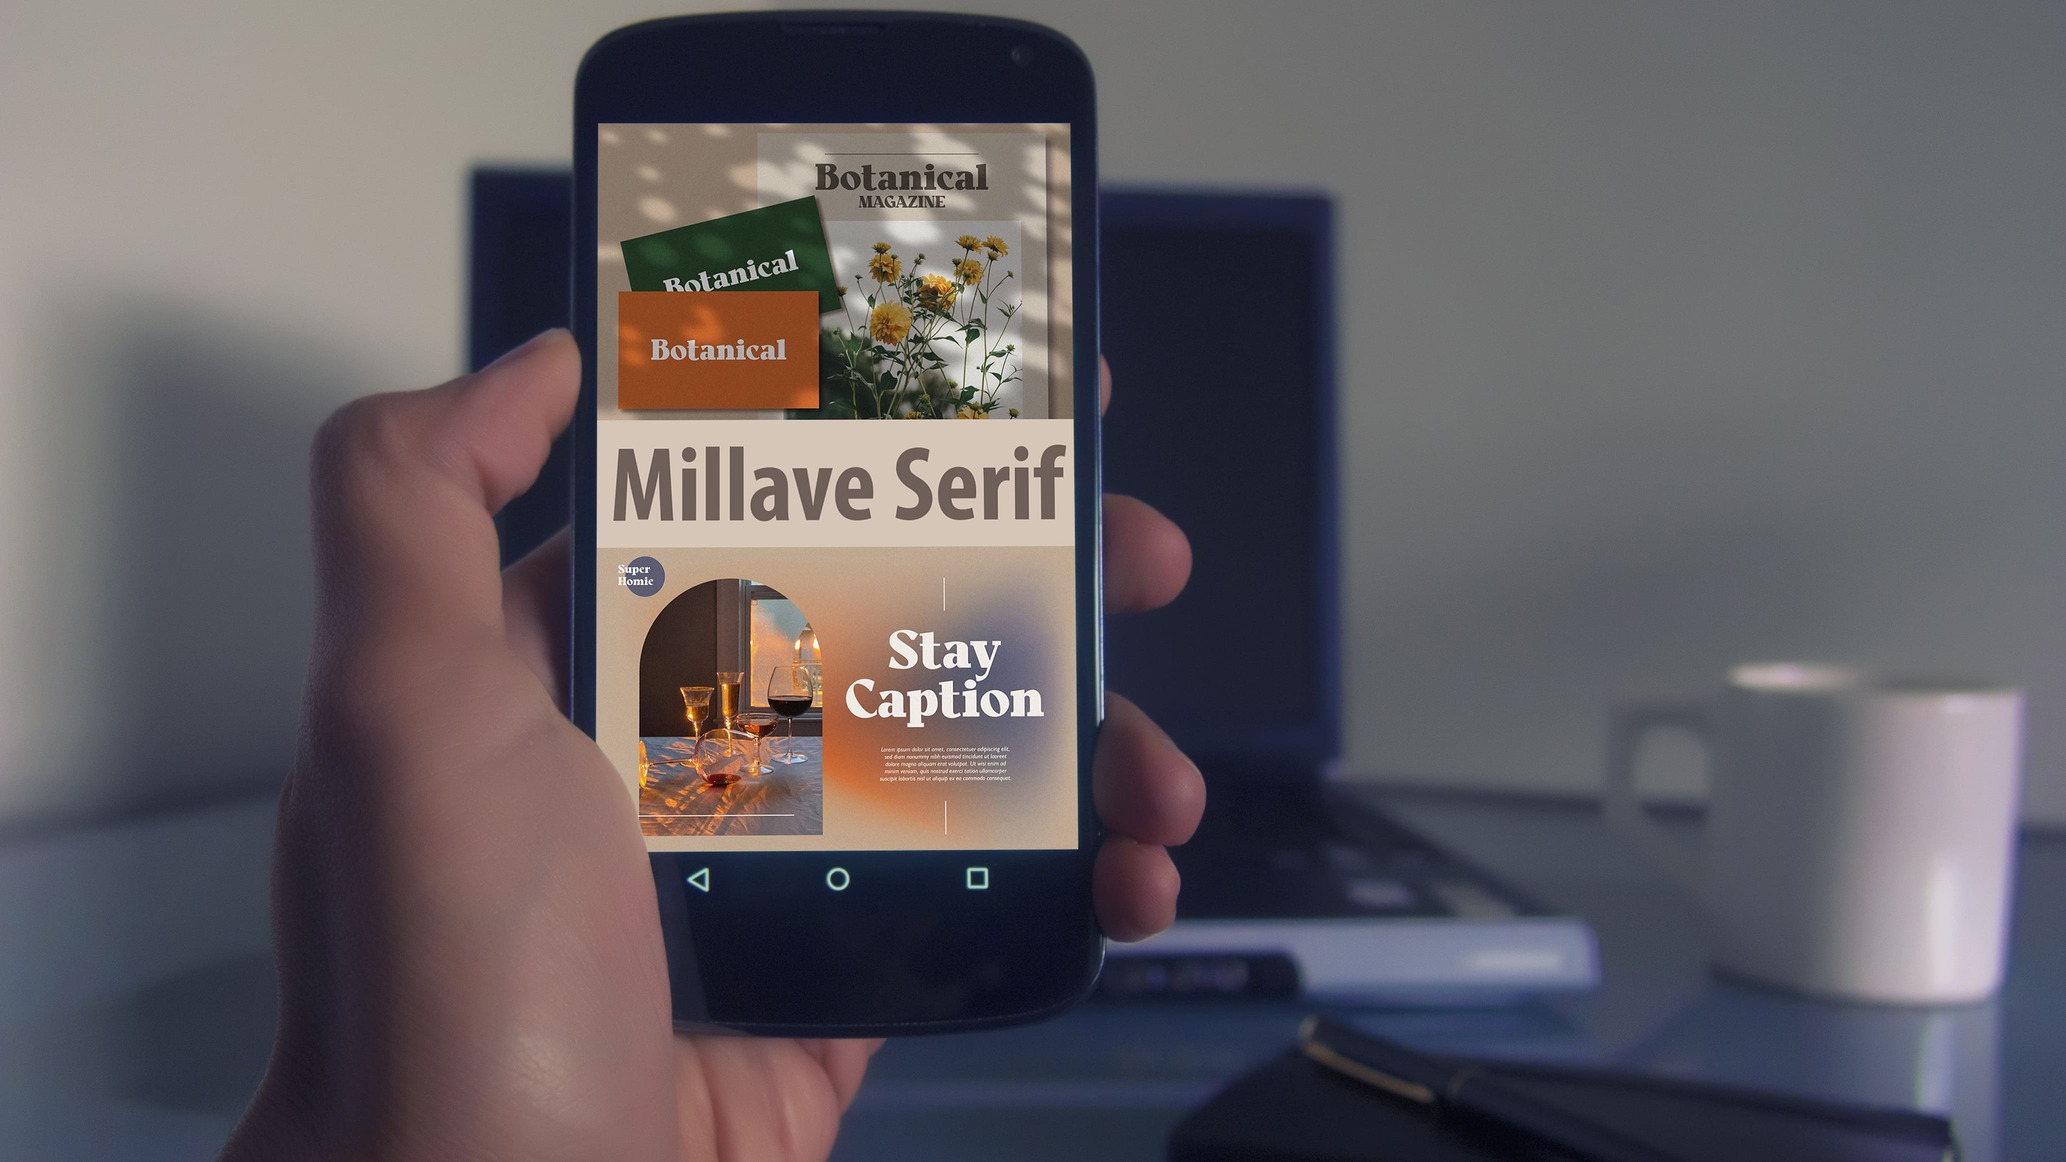 Millave Serif -"Stay Caption" On The Phone.